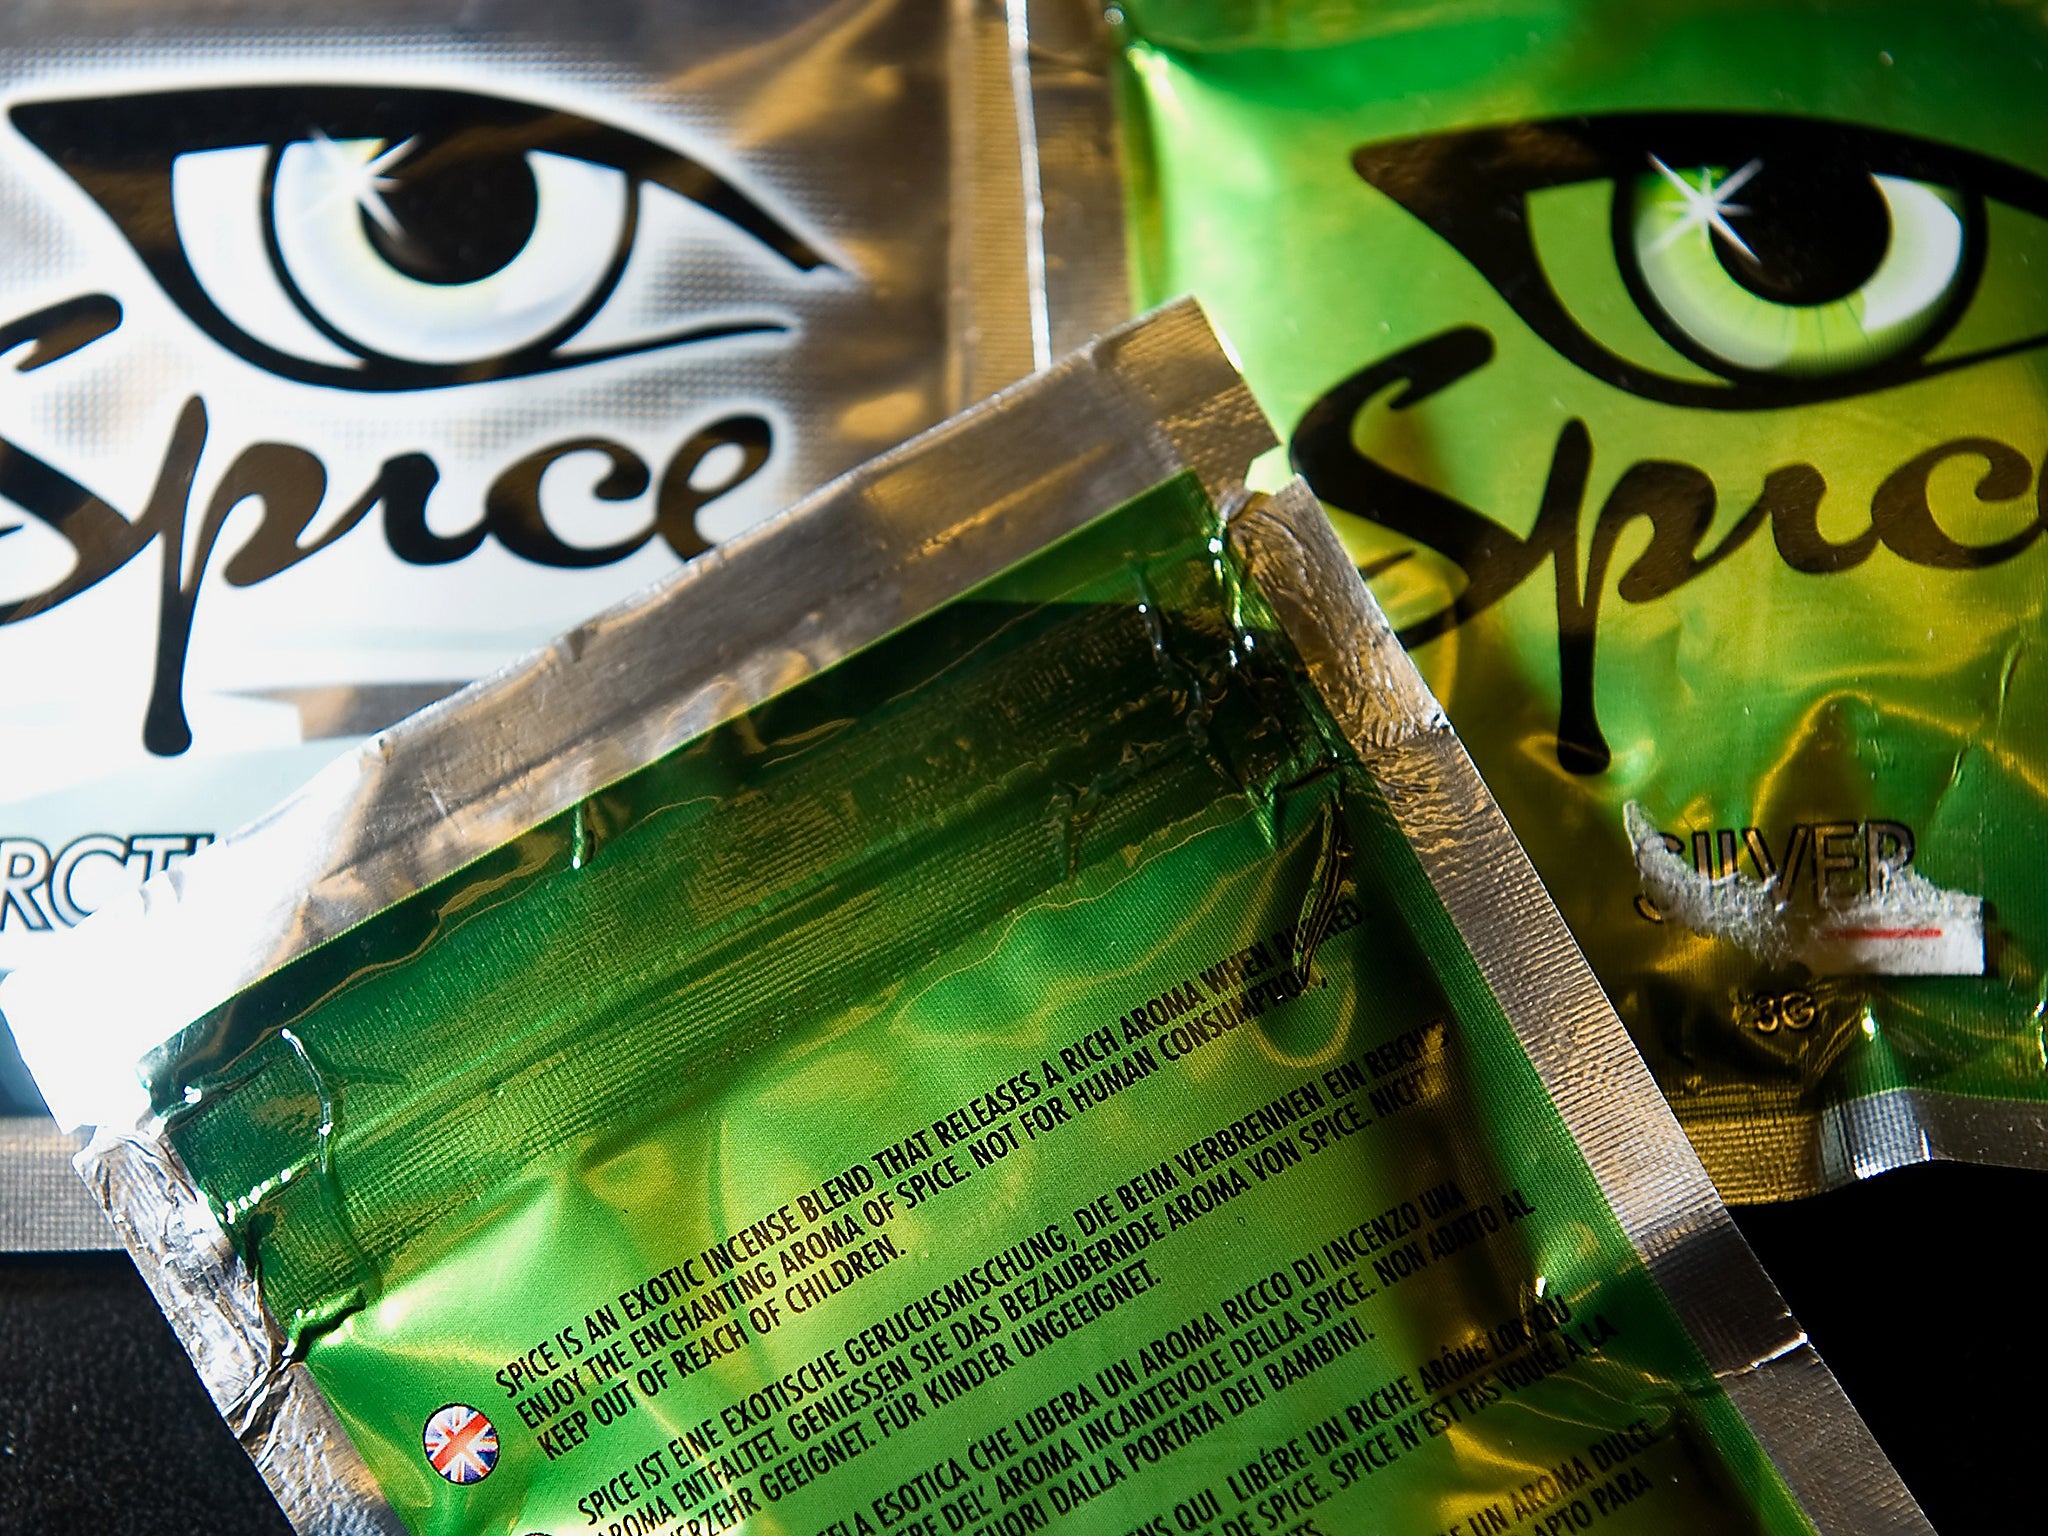 The Government banned the sale of legal highs like Spice in May